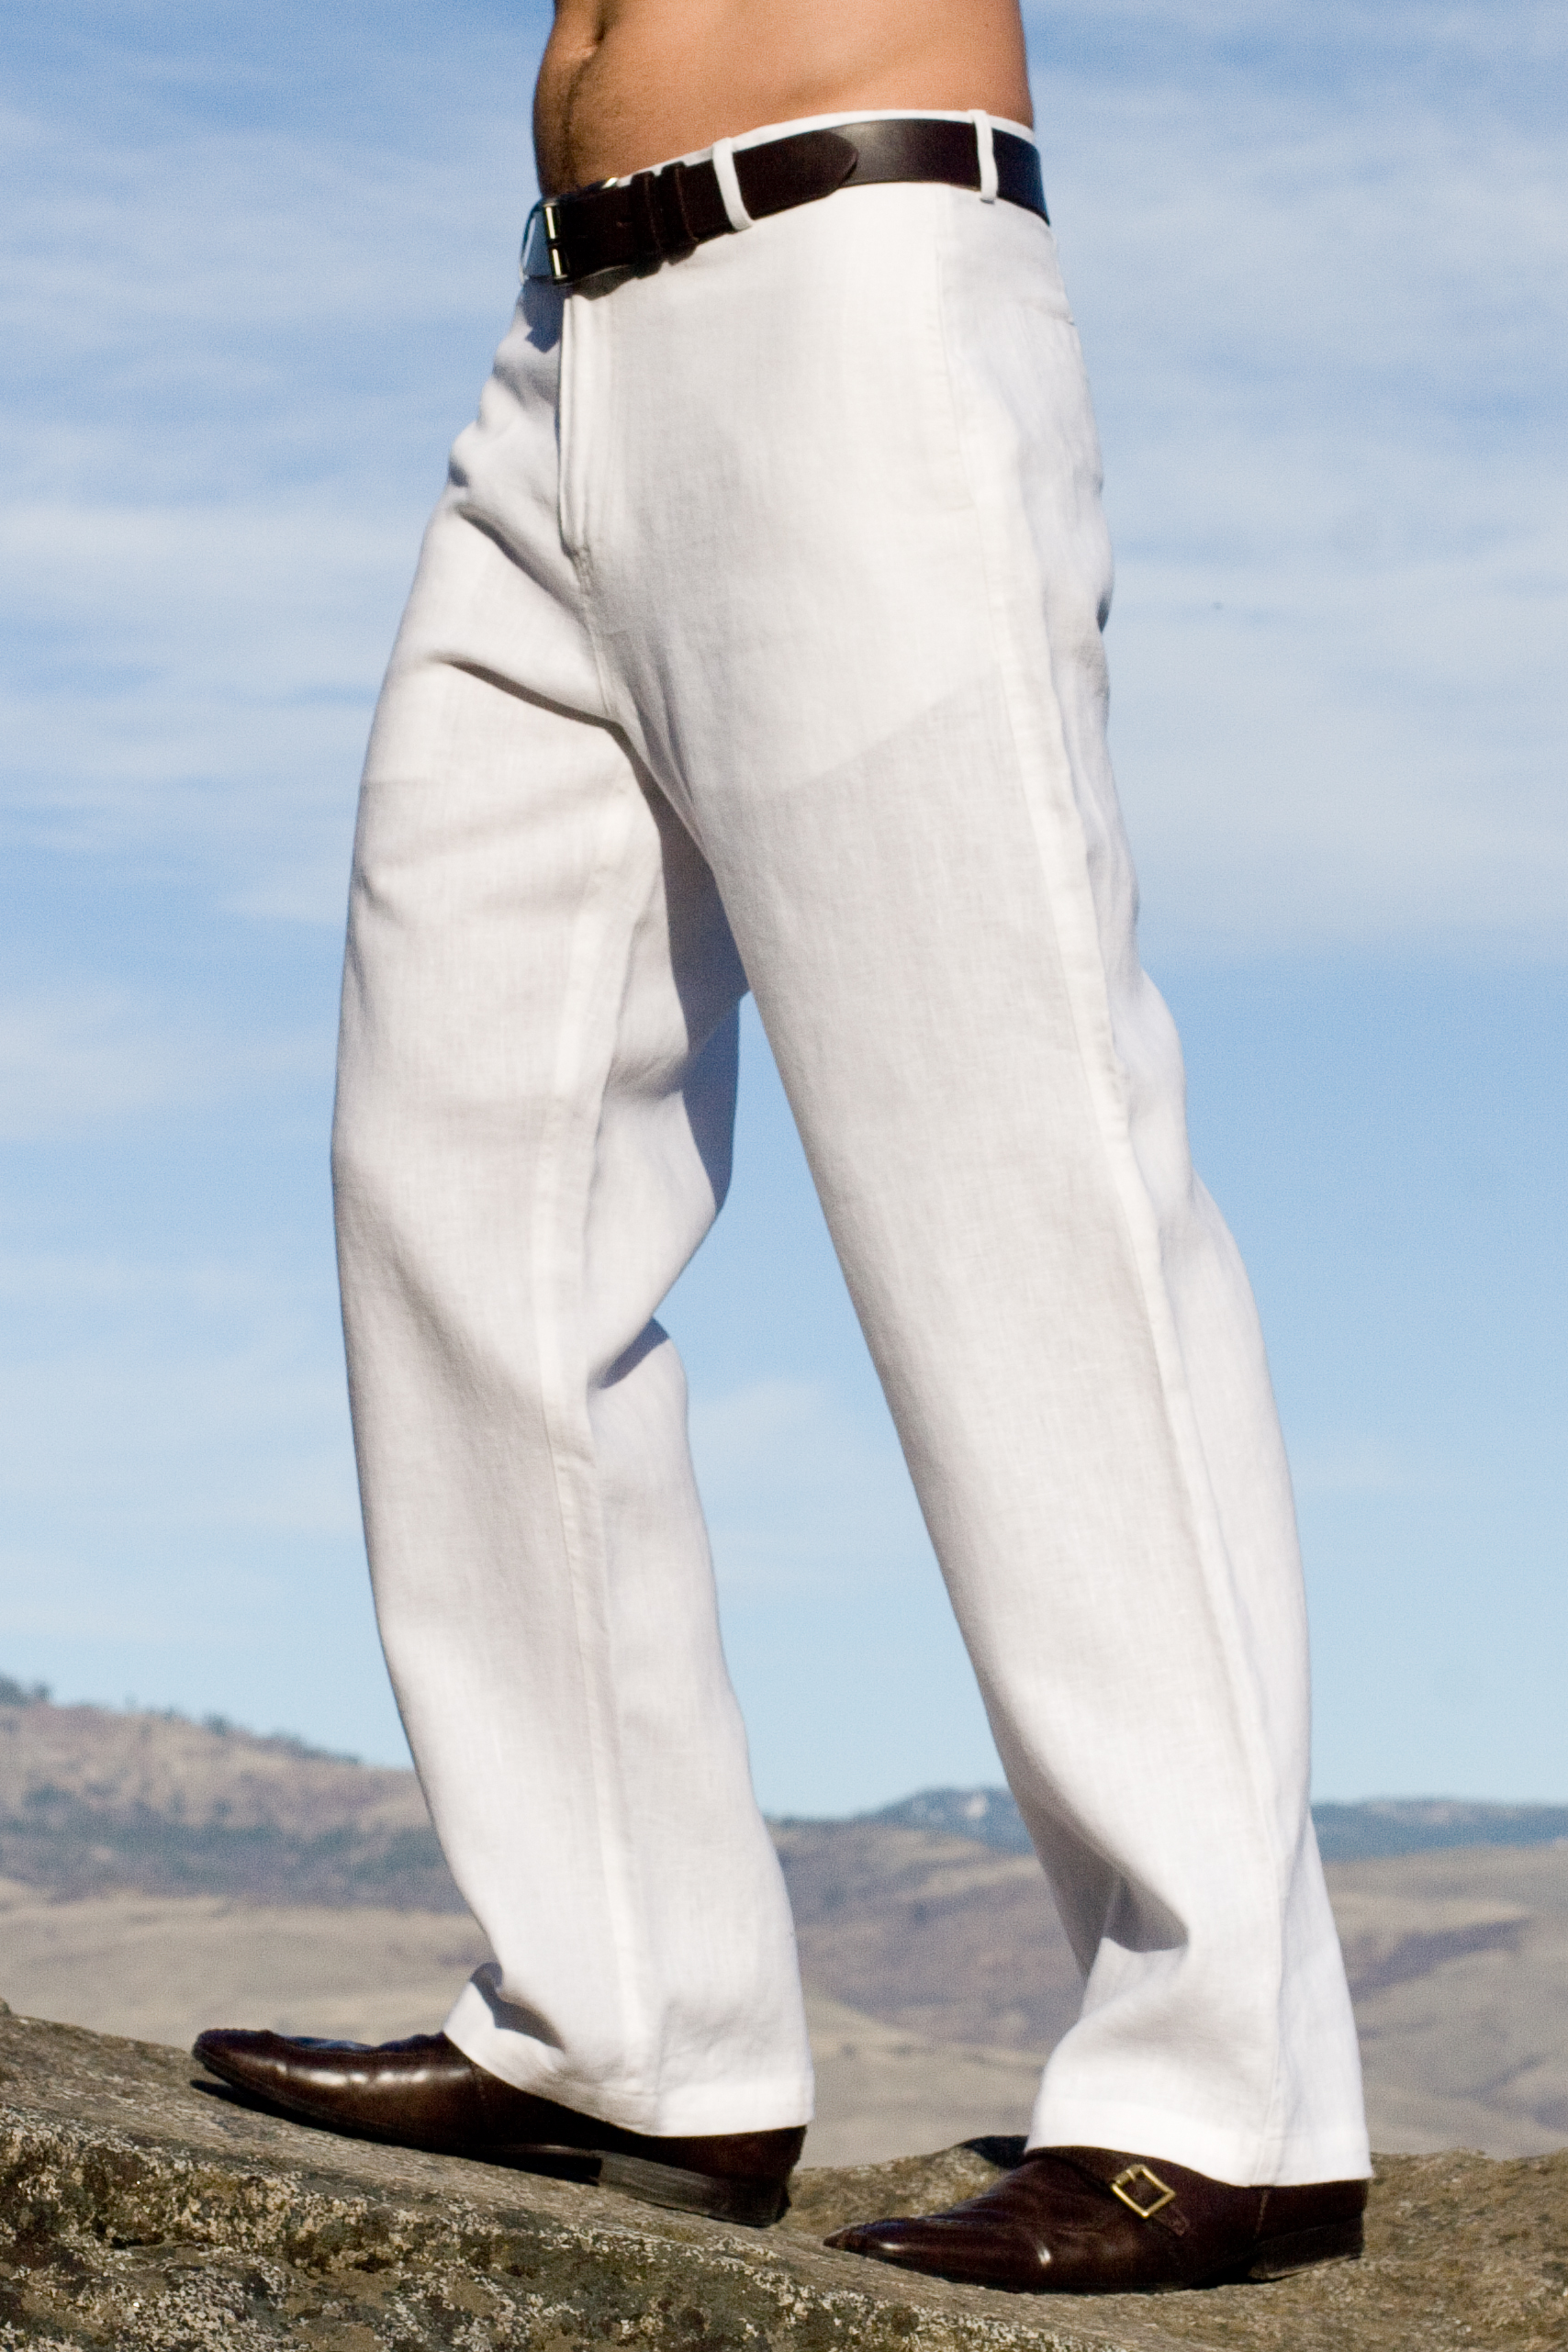 Men's Linen Pants | Summer Clothing in White, Also Available in Black,  Navy, Denim, Gray, Blue, and Gray. 100% Natural Italian Style Pant with